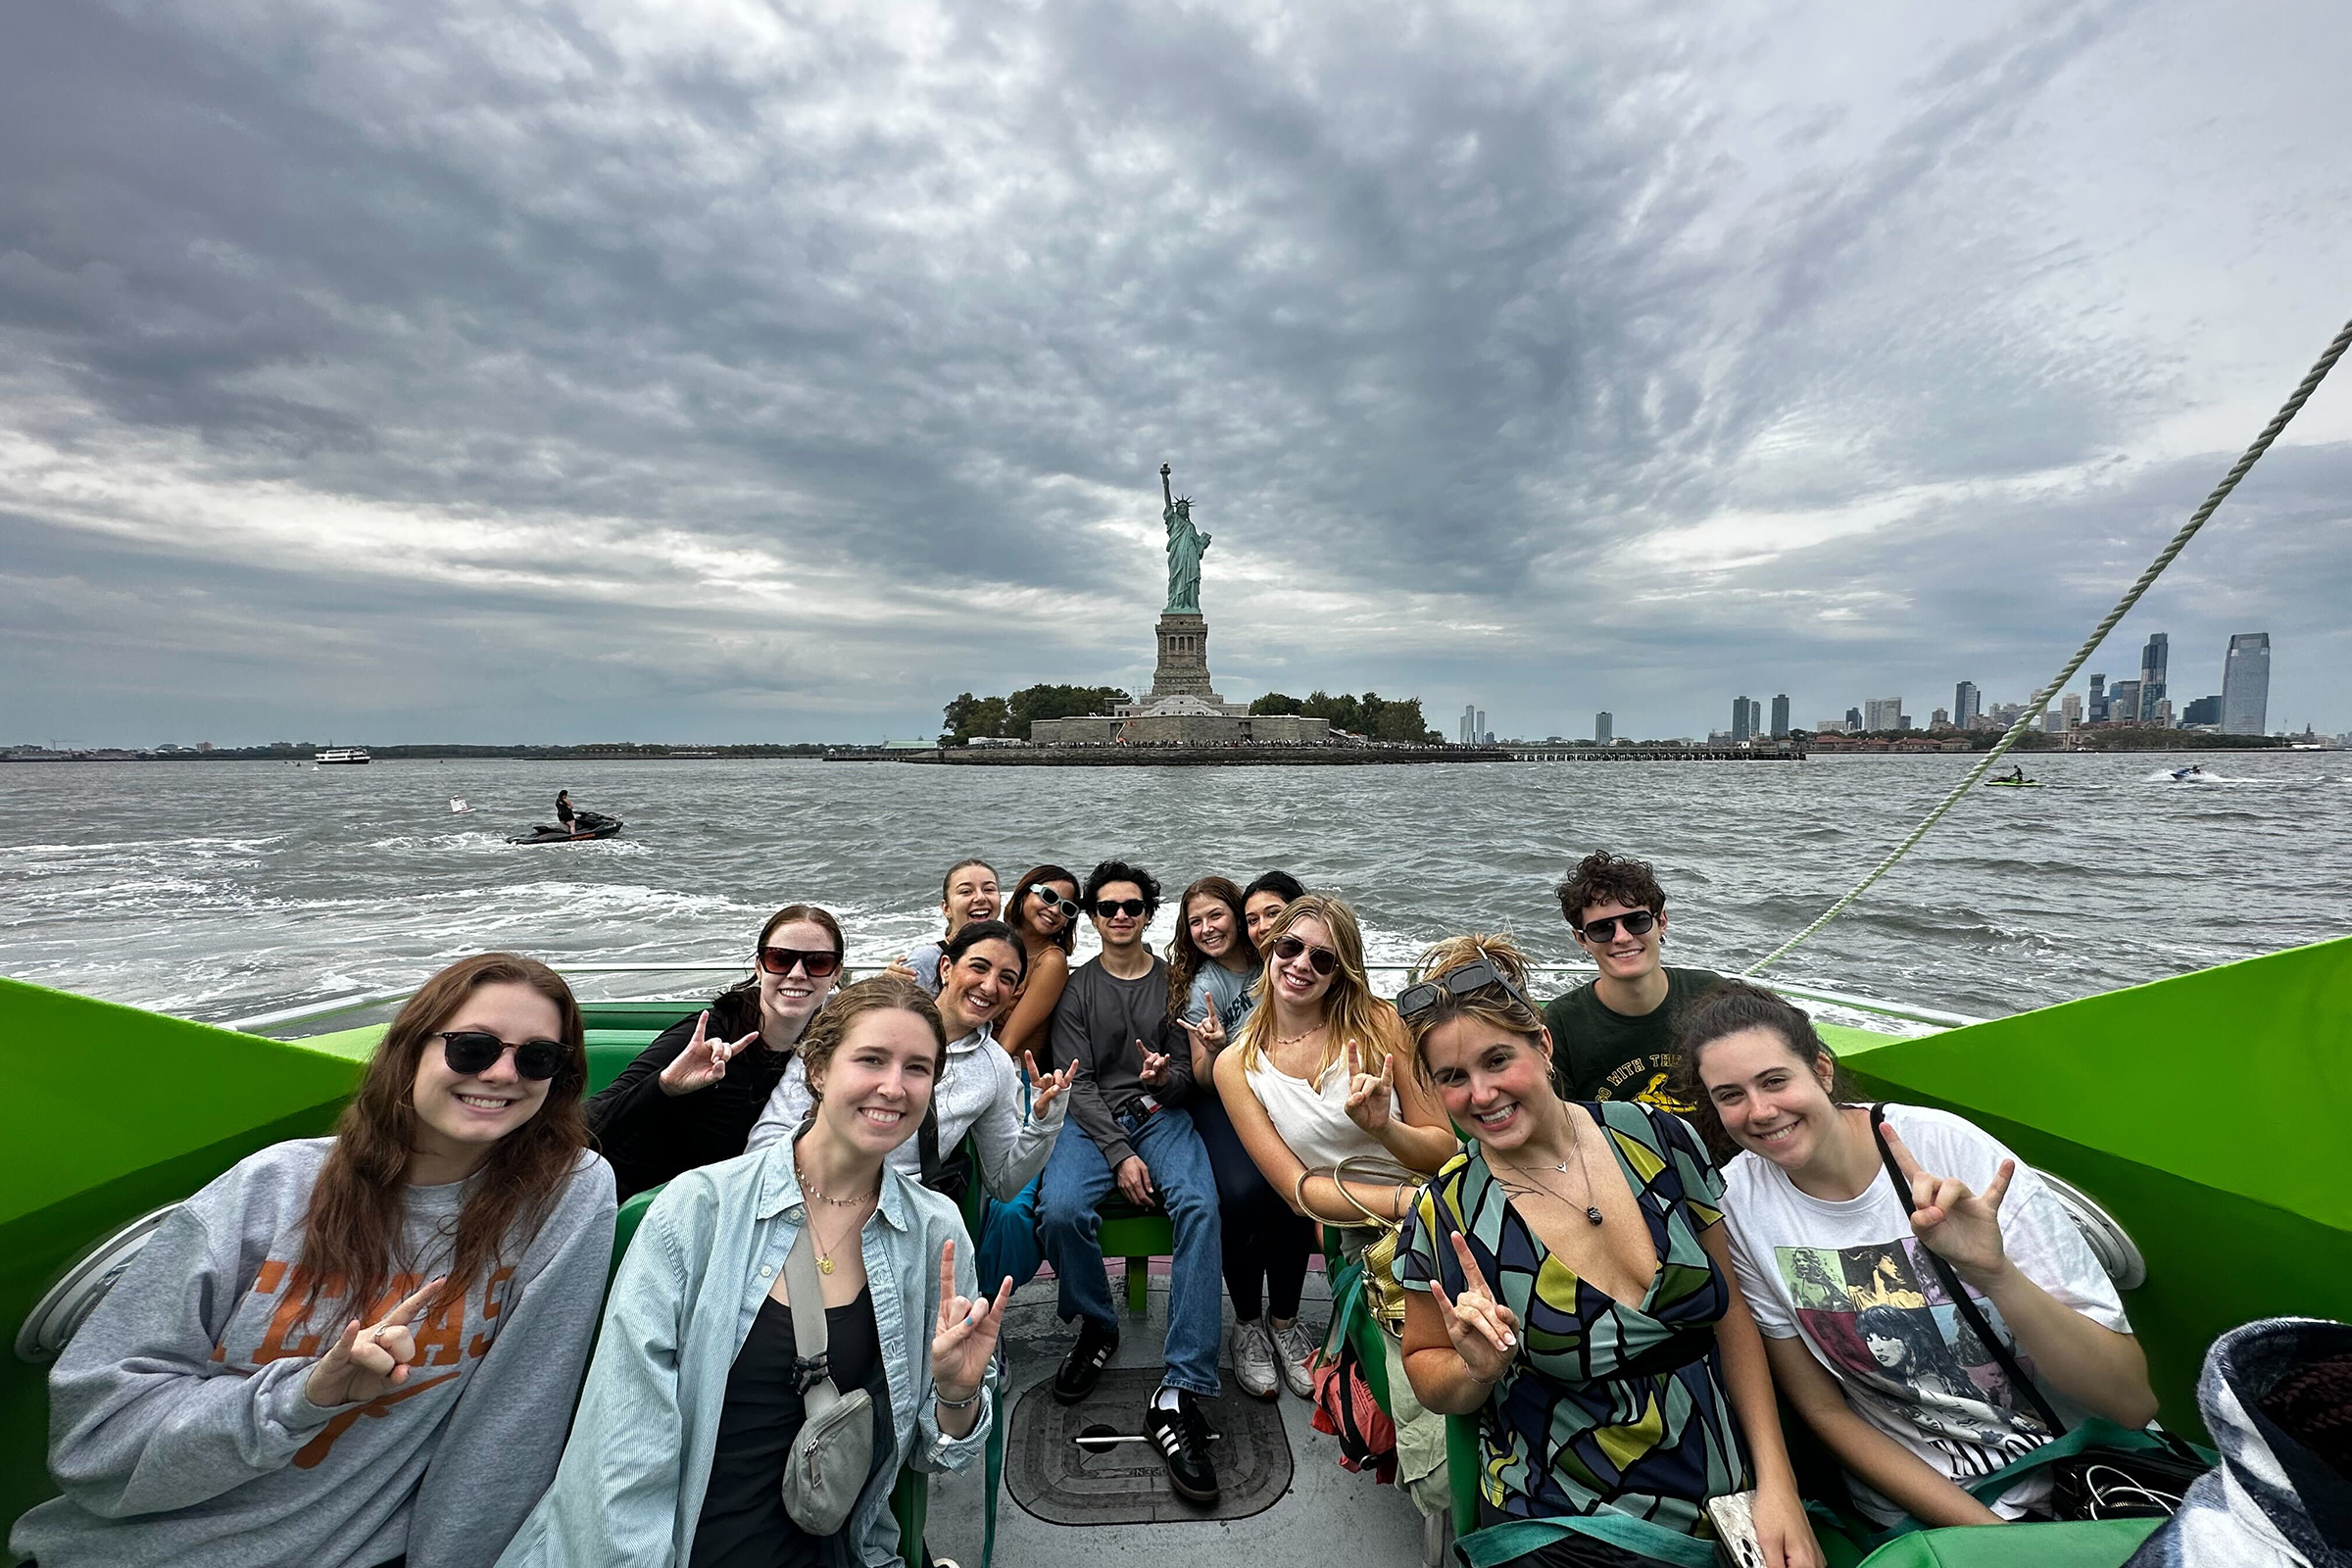 Students holding up hook’em horns signs on a boat in New York City with the Statue of Liberty in the background